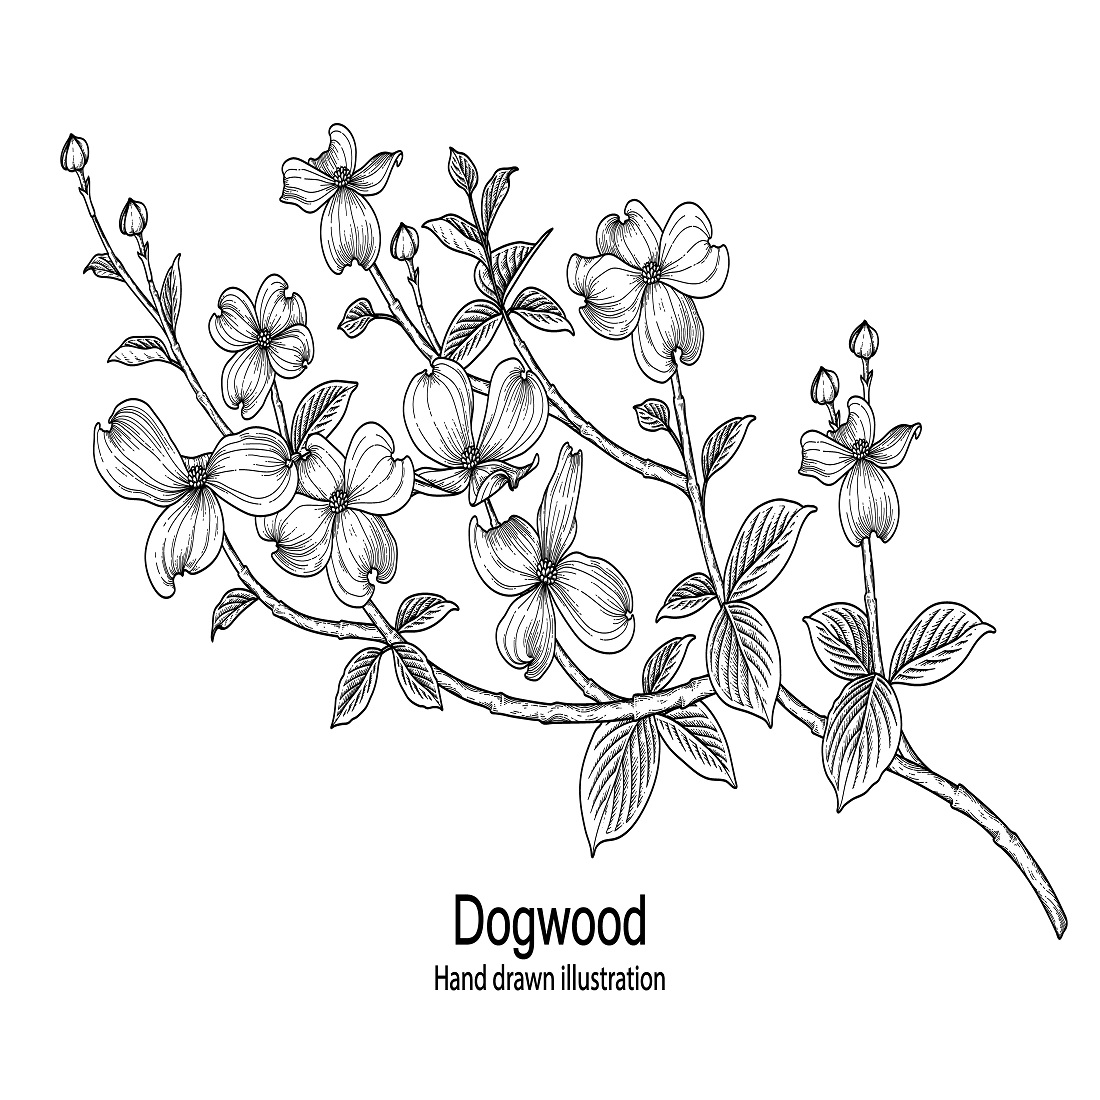 Dogwood flower drawings preview image.